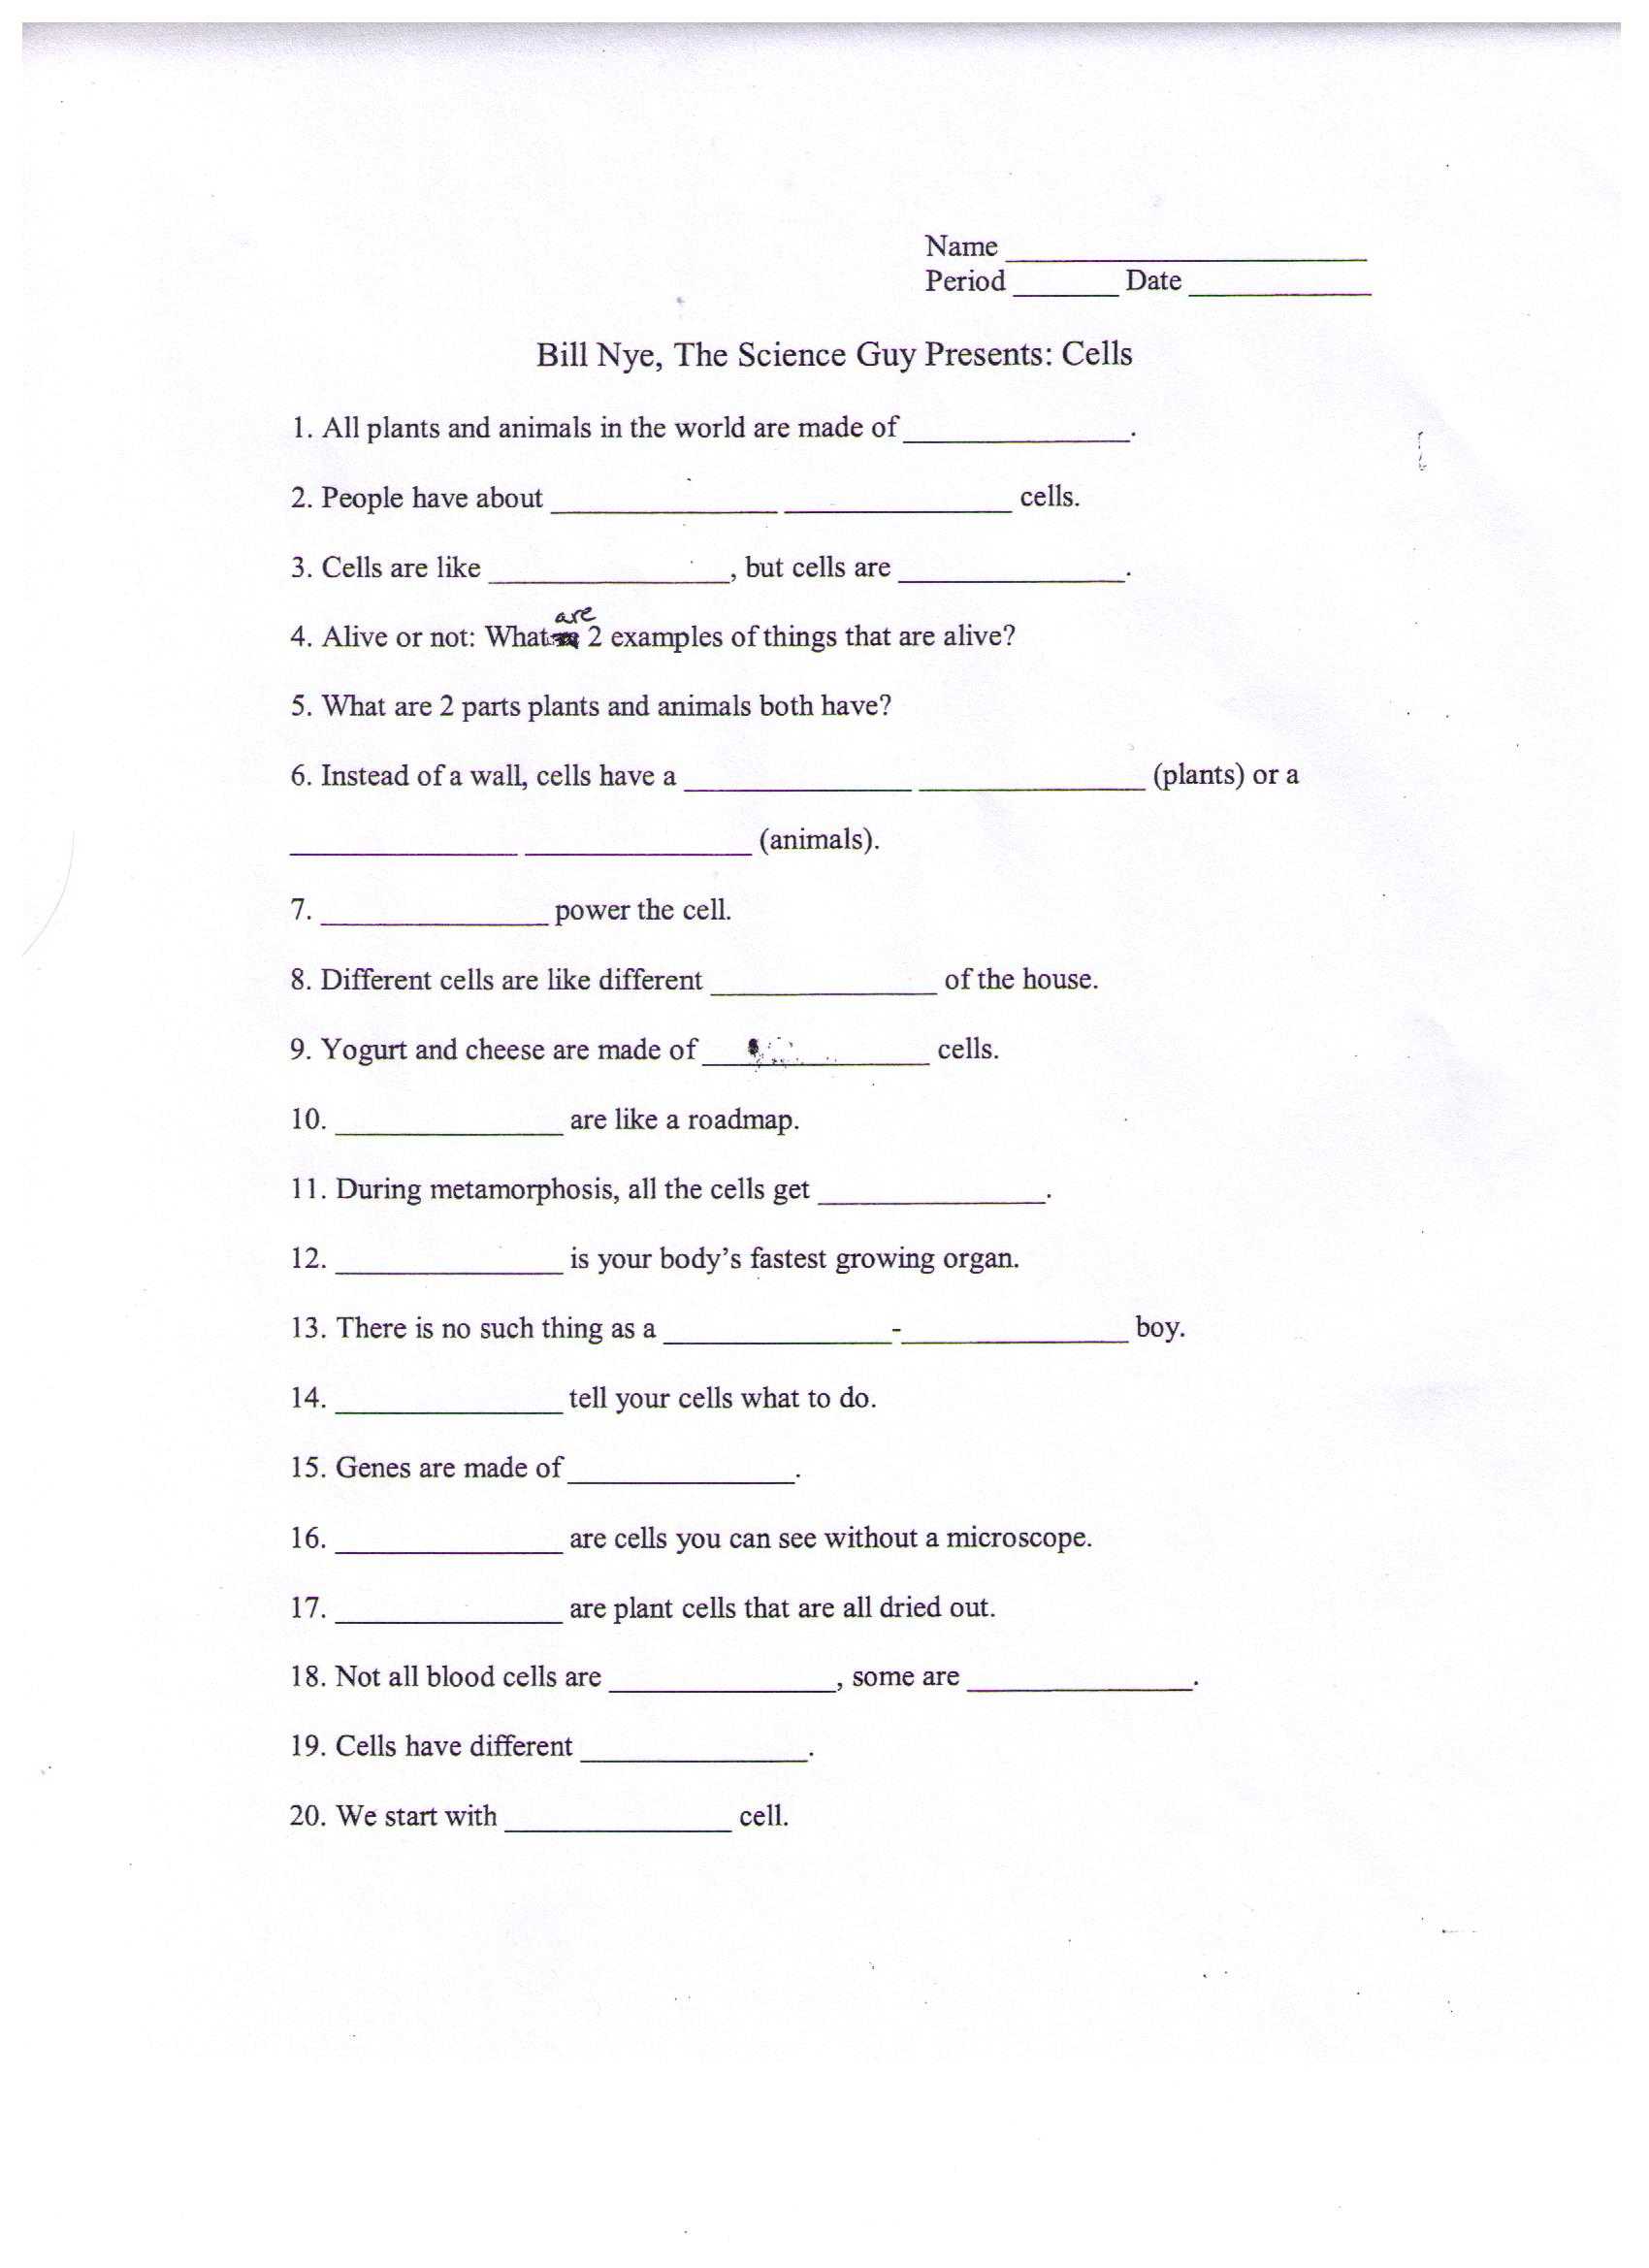 Bill Nye the Science Guy Energy Worksheet or Bill Nye the Science Guy Energy Worksheet Answers Image Collections